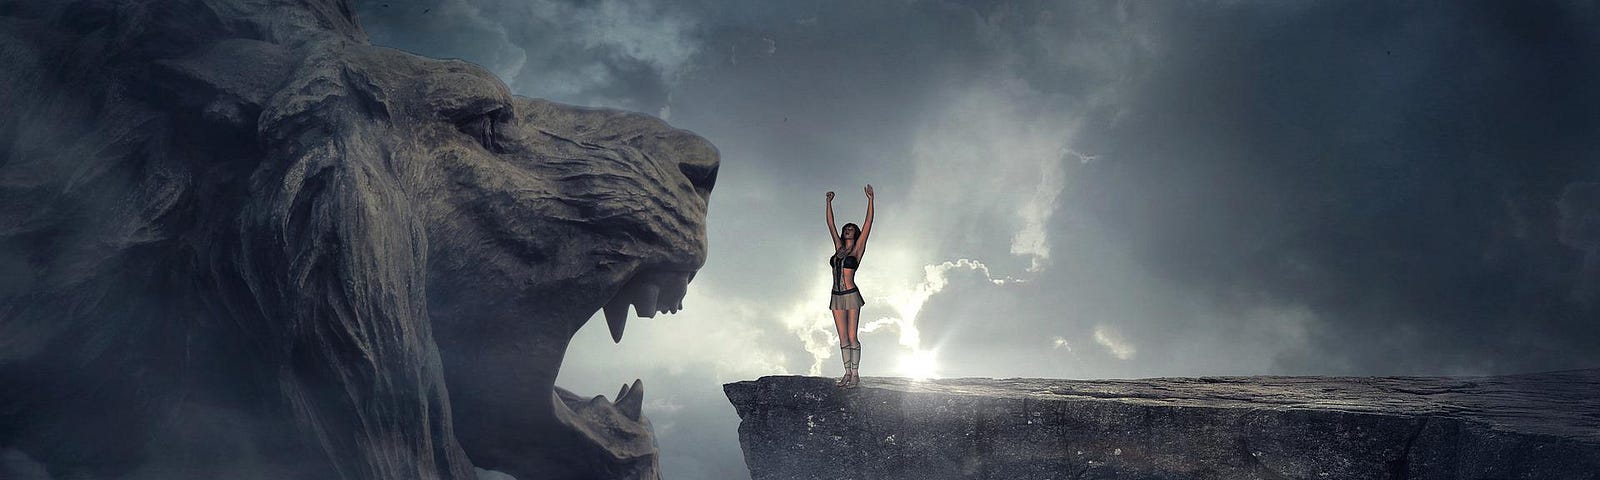 On the left, a giant stone lion’s head faces to the right with mouth open. In the centre, a tiny human figure stands on a cliff edge with arms extended straight up. In the background, the sun pierces through the clouds.